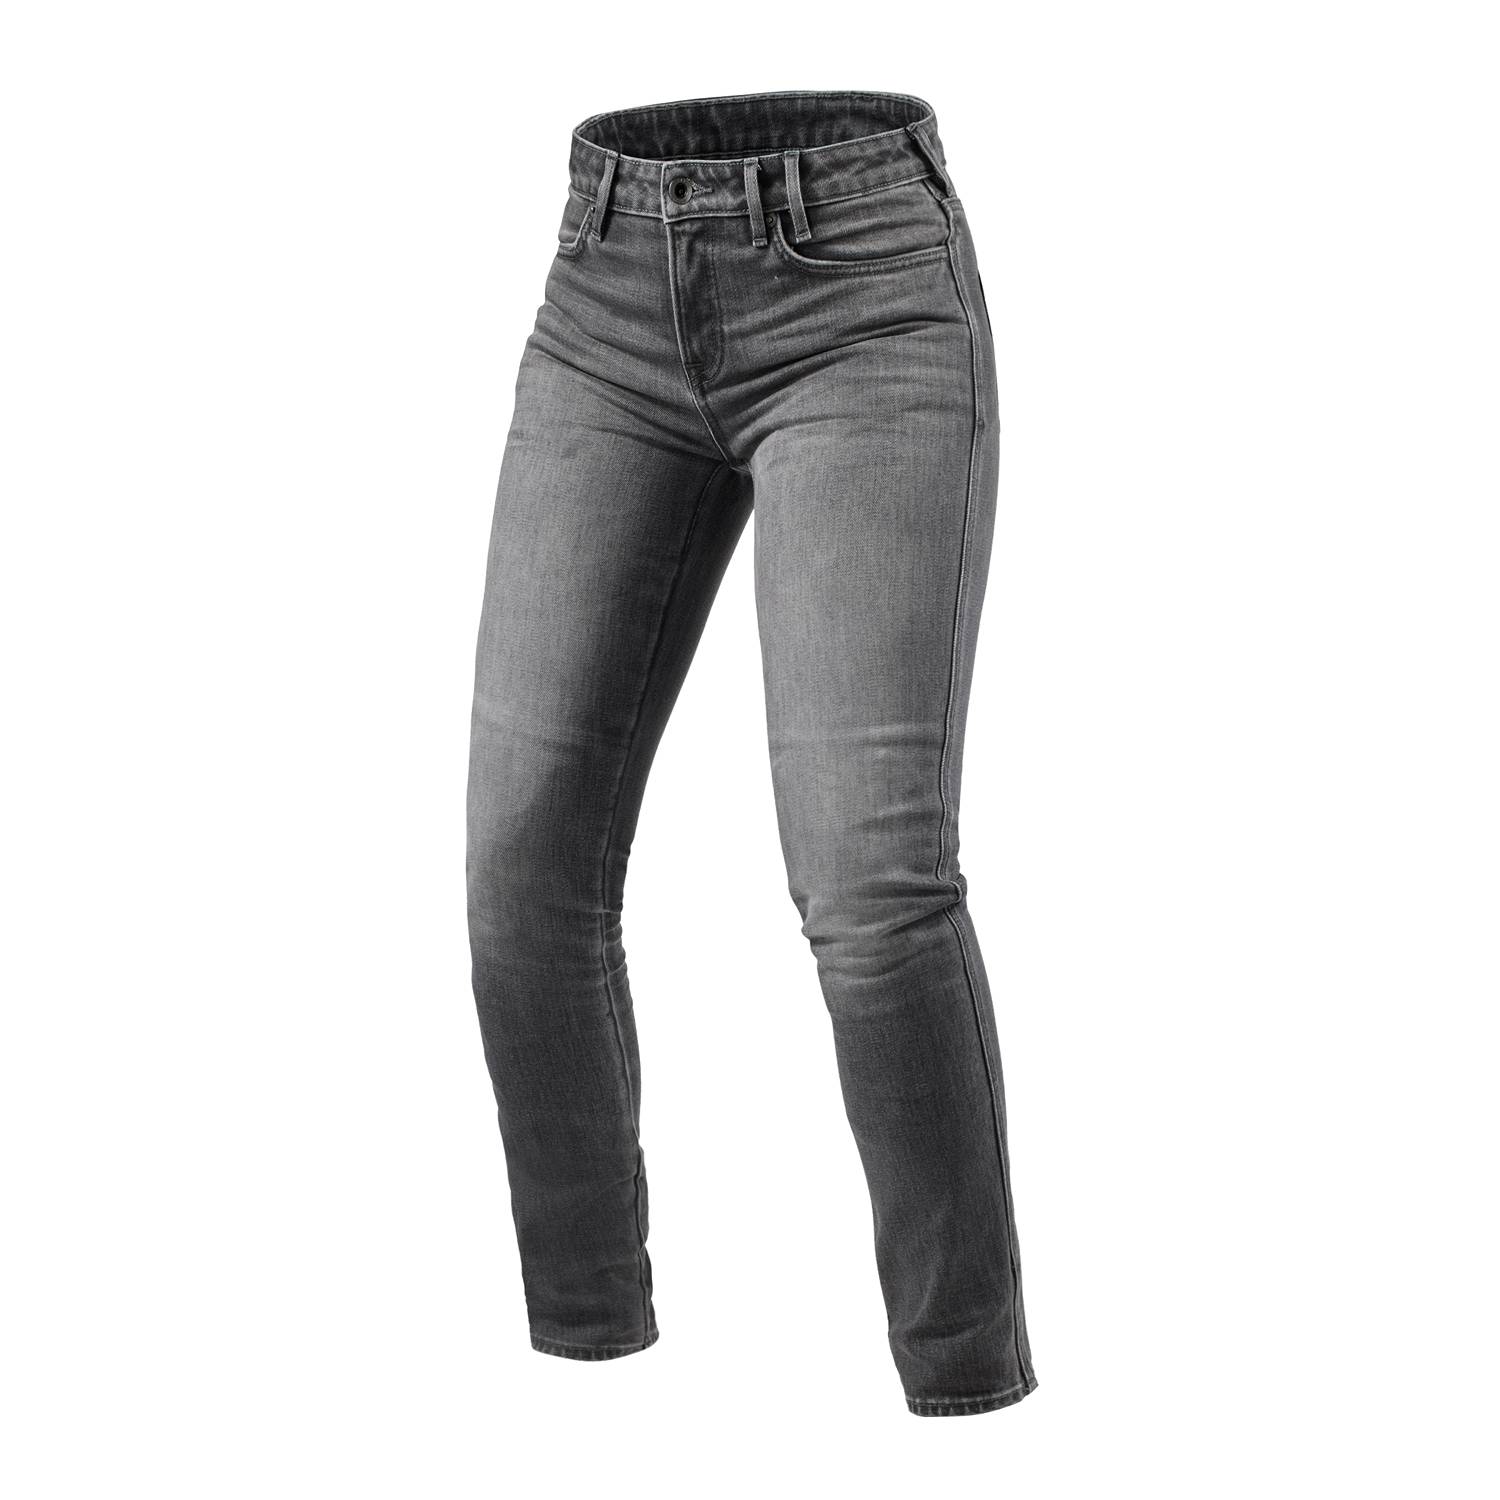 Image of REV'IT! Jeans Shelby 2 Ladies SK Medium Grey Stone L30 Taille L30/W29